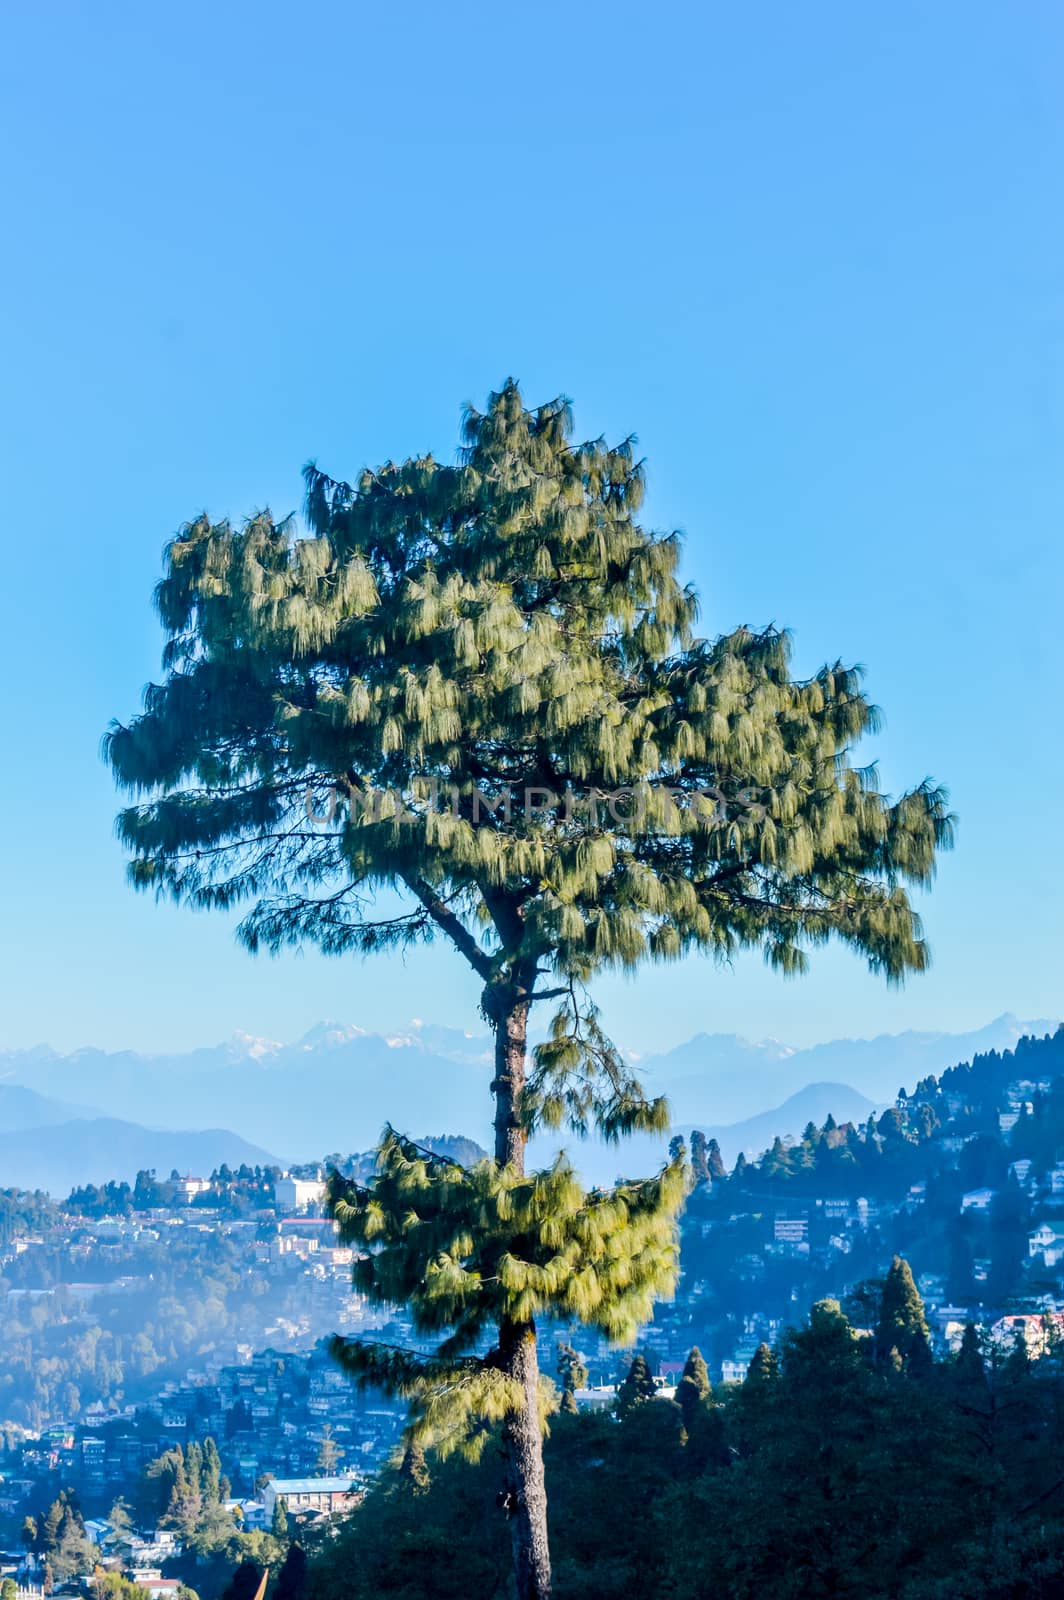 A needle pine conifer or blue pine (Pinus wallichiana) - a large Himalayan evergreen tree with a blue hue on its foliage standing alone against blue sky and distant Karakoram and Hindu Kush mountains. by sudiptabhowmick